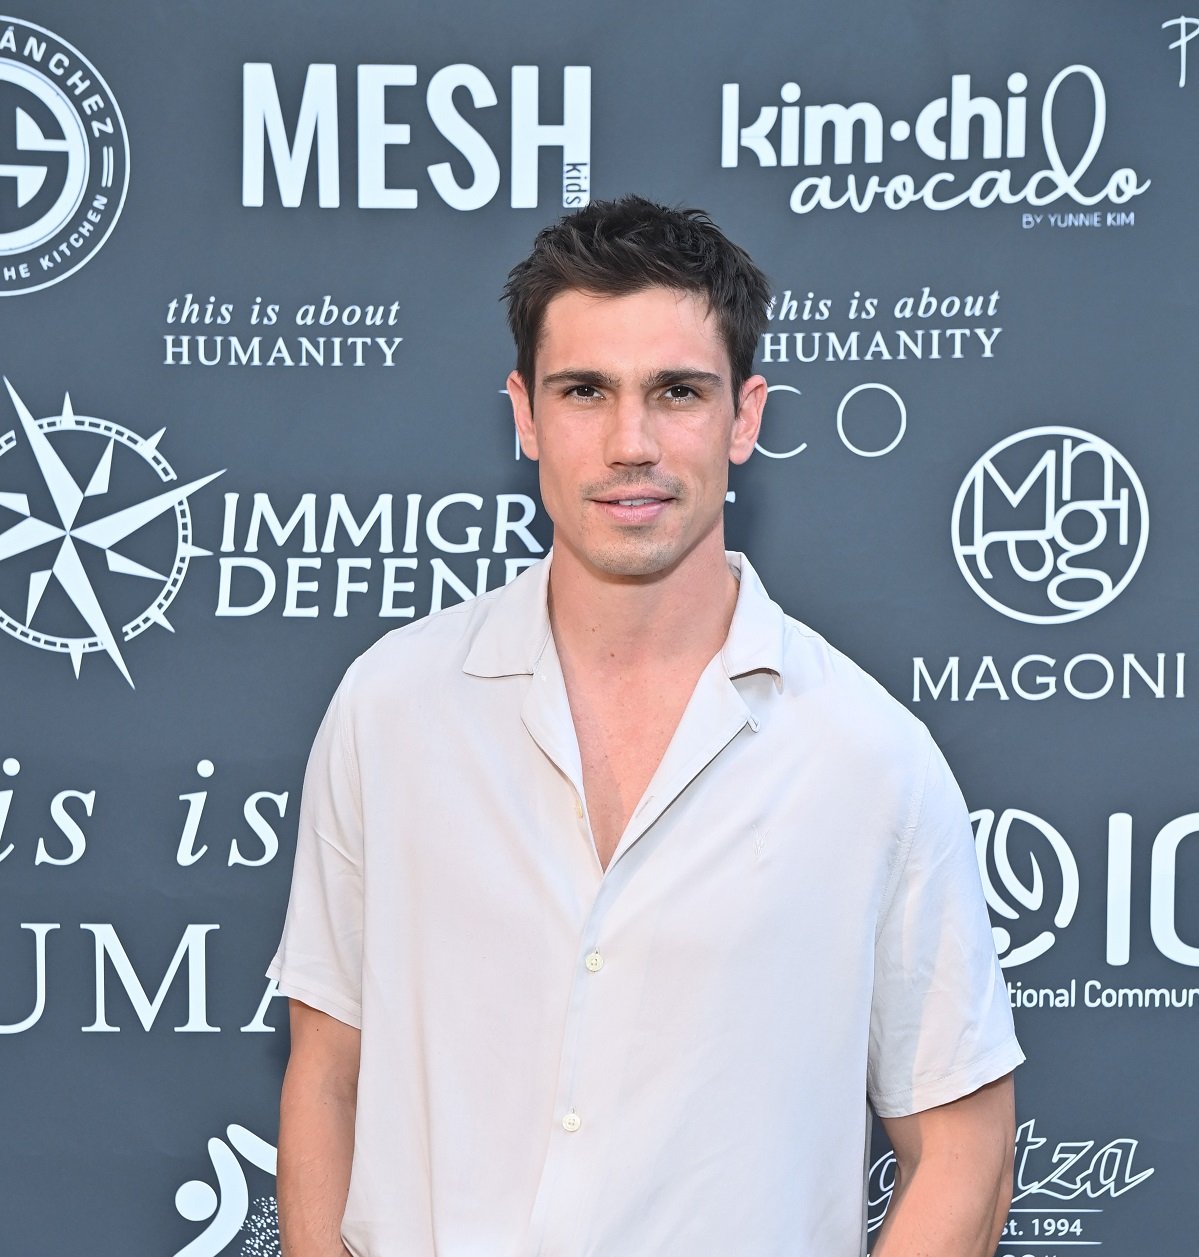 'The Bold and the Beautiful' star Tanner Novlan wearing a white shirt and posing during a red carpet appearance.